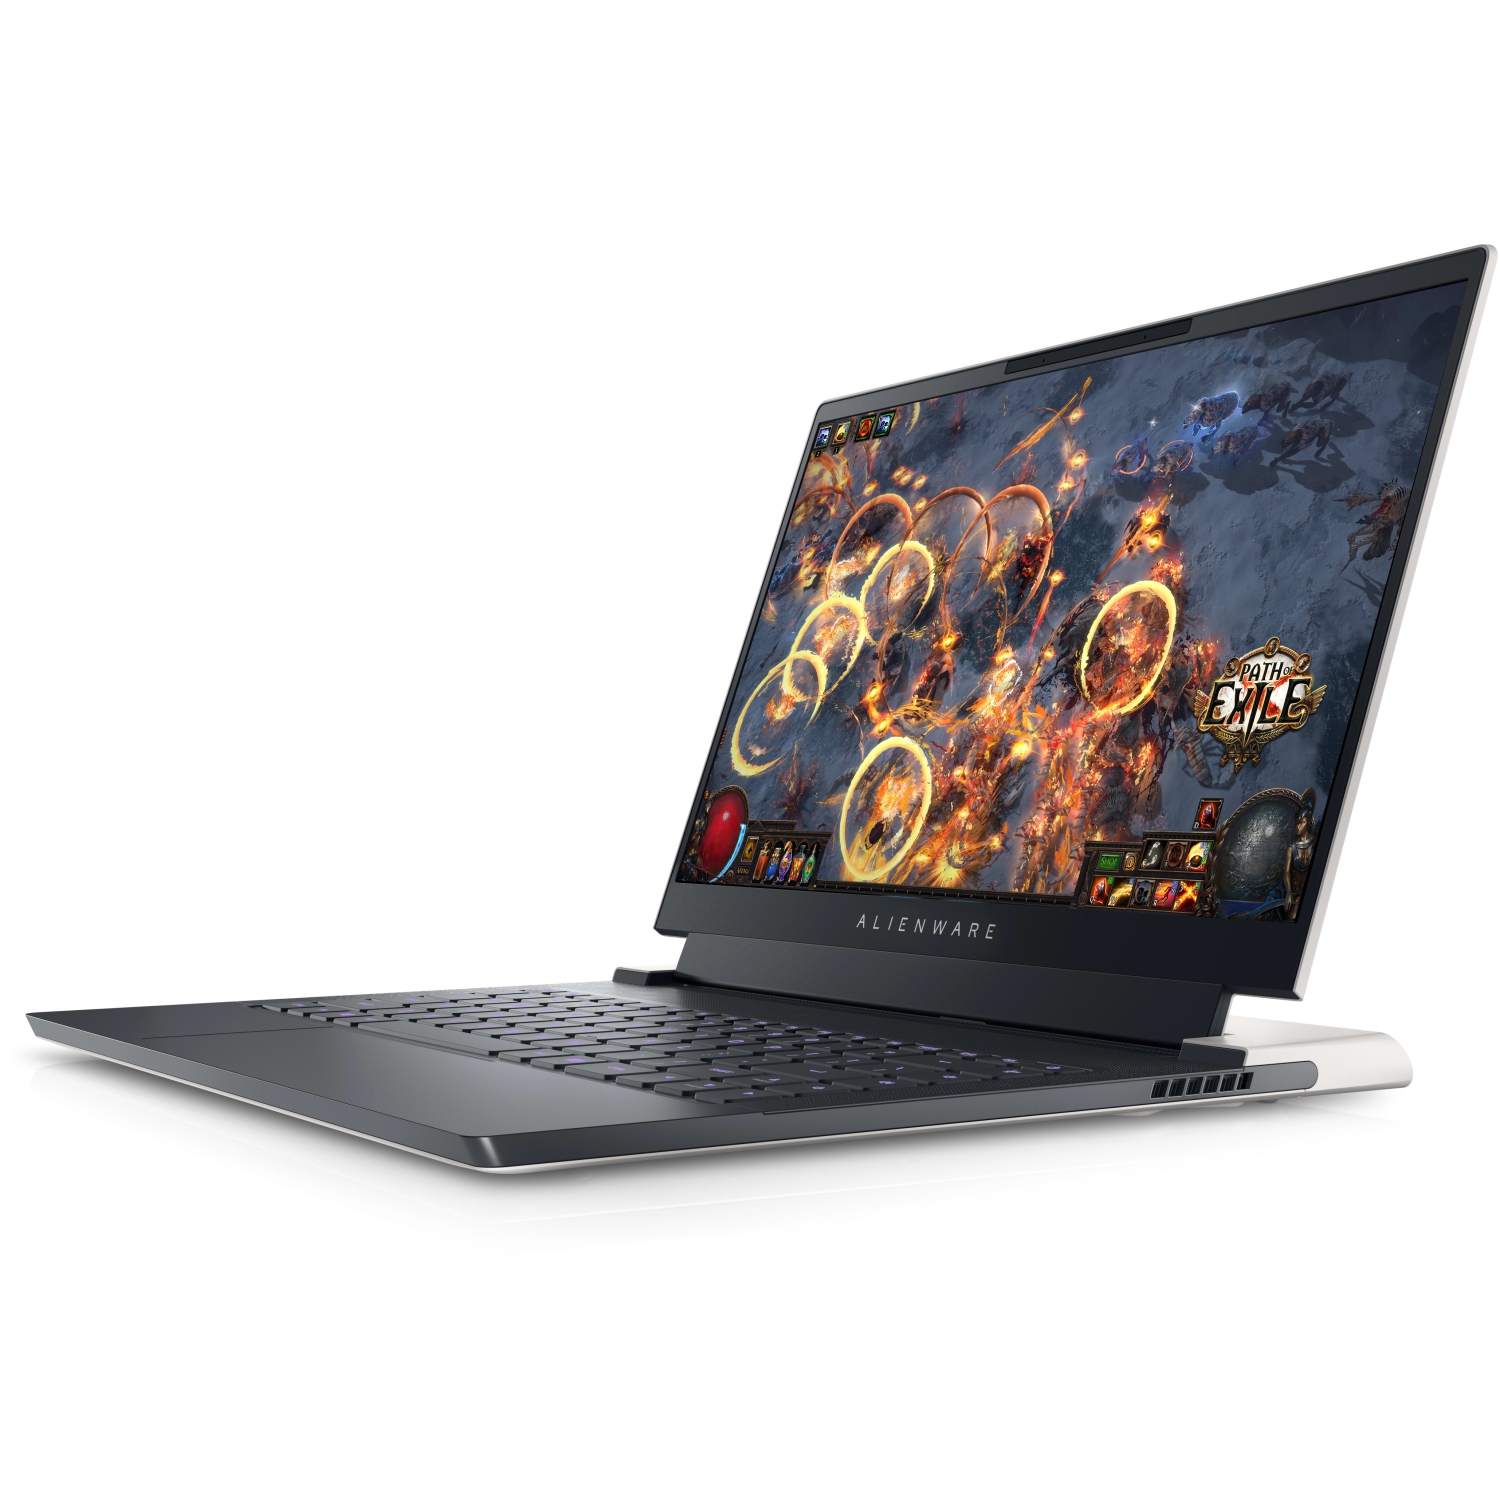 Refurbished (Excellent) – Dell Alienware X14 Gaming Laptop (2022) | 14" FHD | Core i7 - 1TB SSD - 32GB RAM - RTX 3060 | 14 Cores @ 4.7 GHz - 12th Gen CPU - 6GB GDDR6